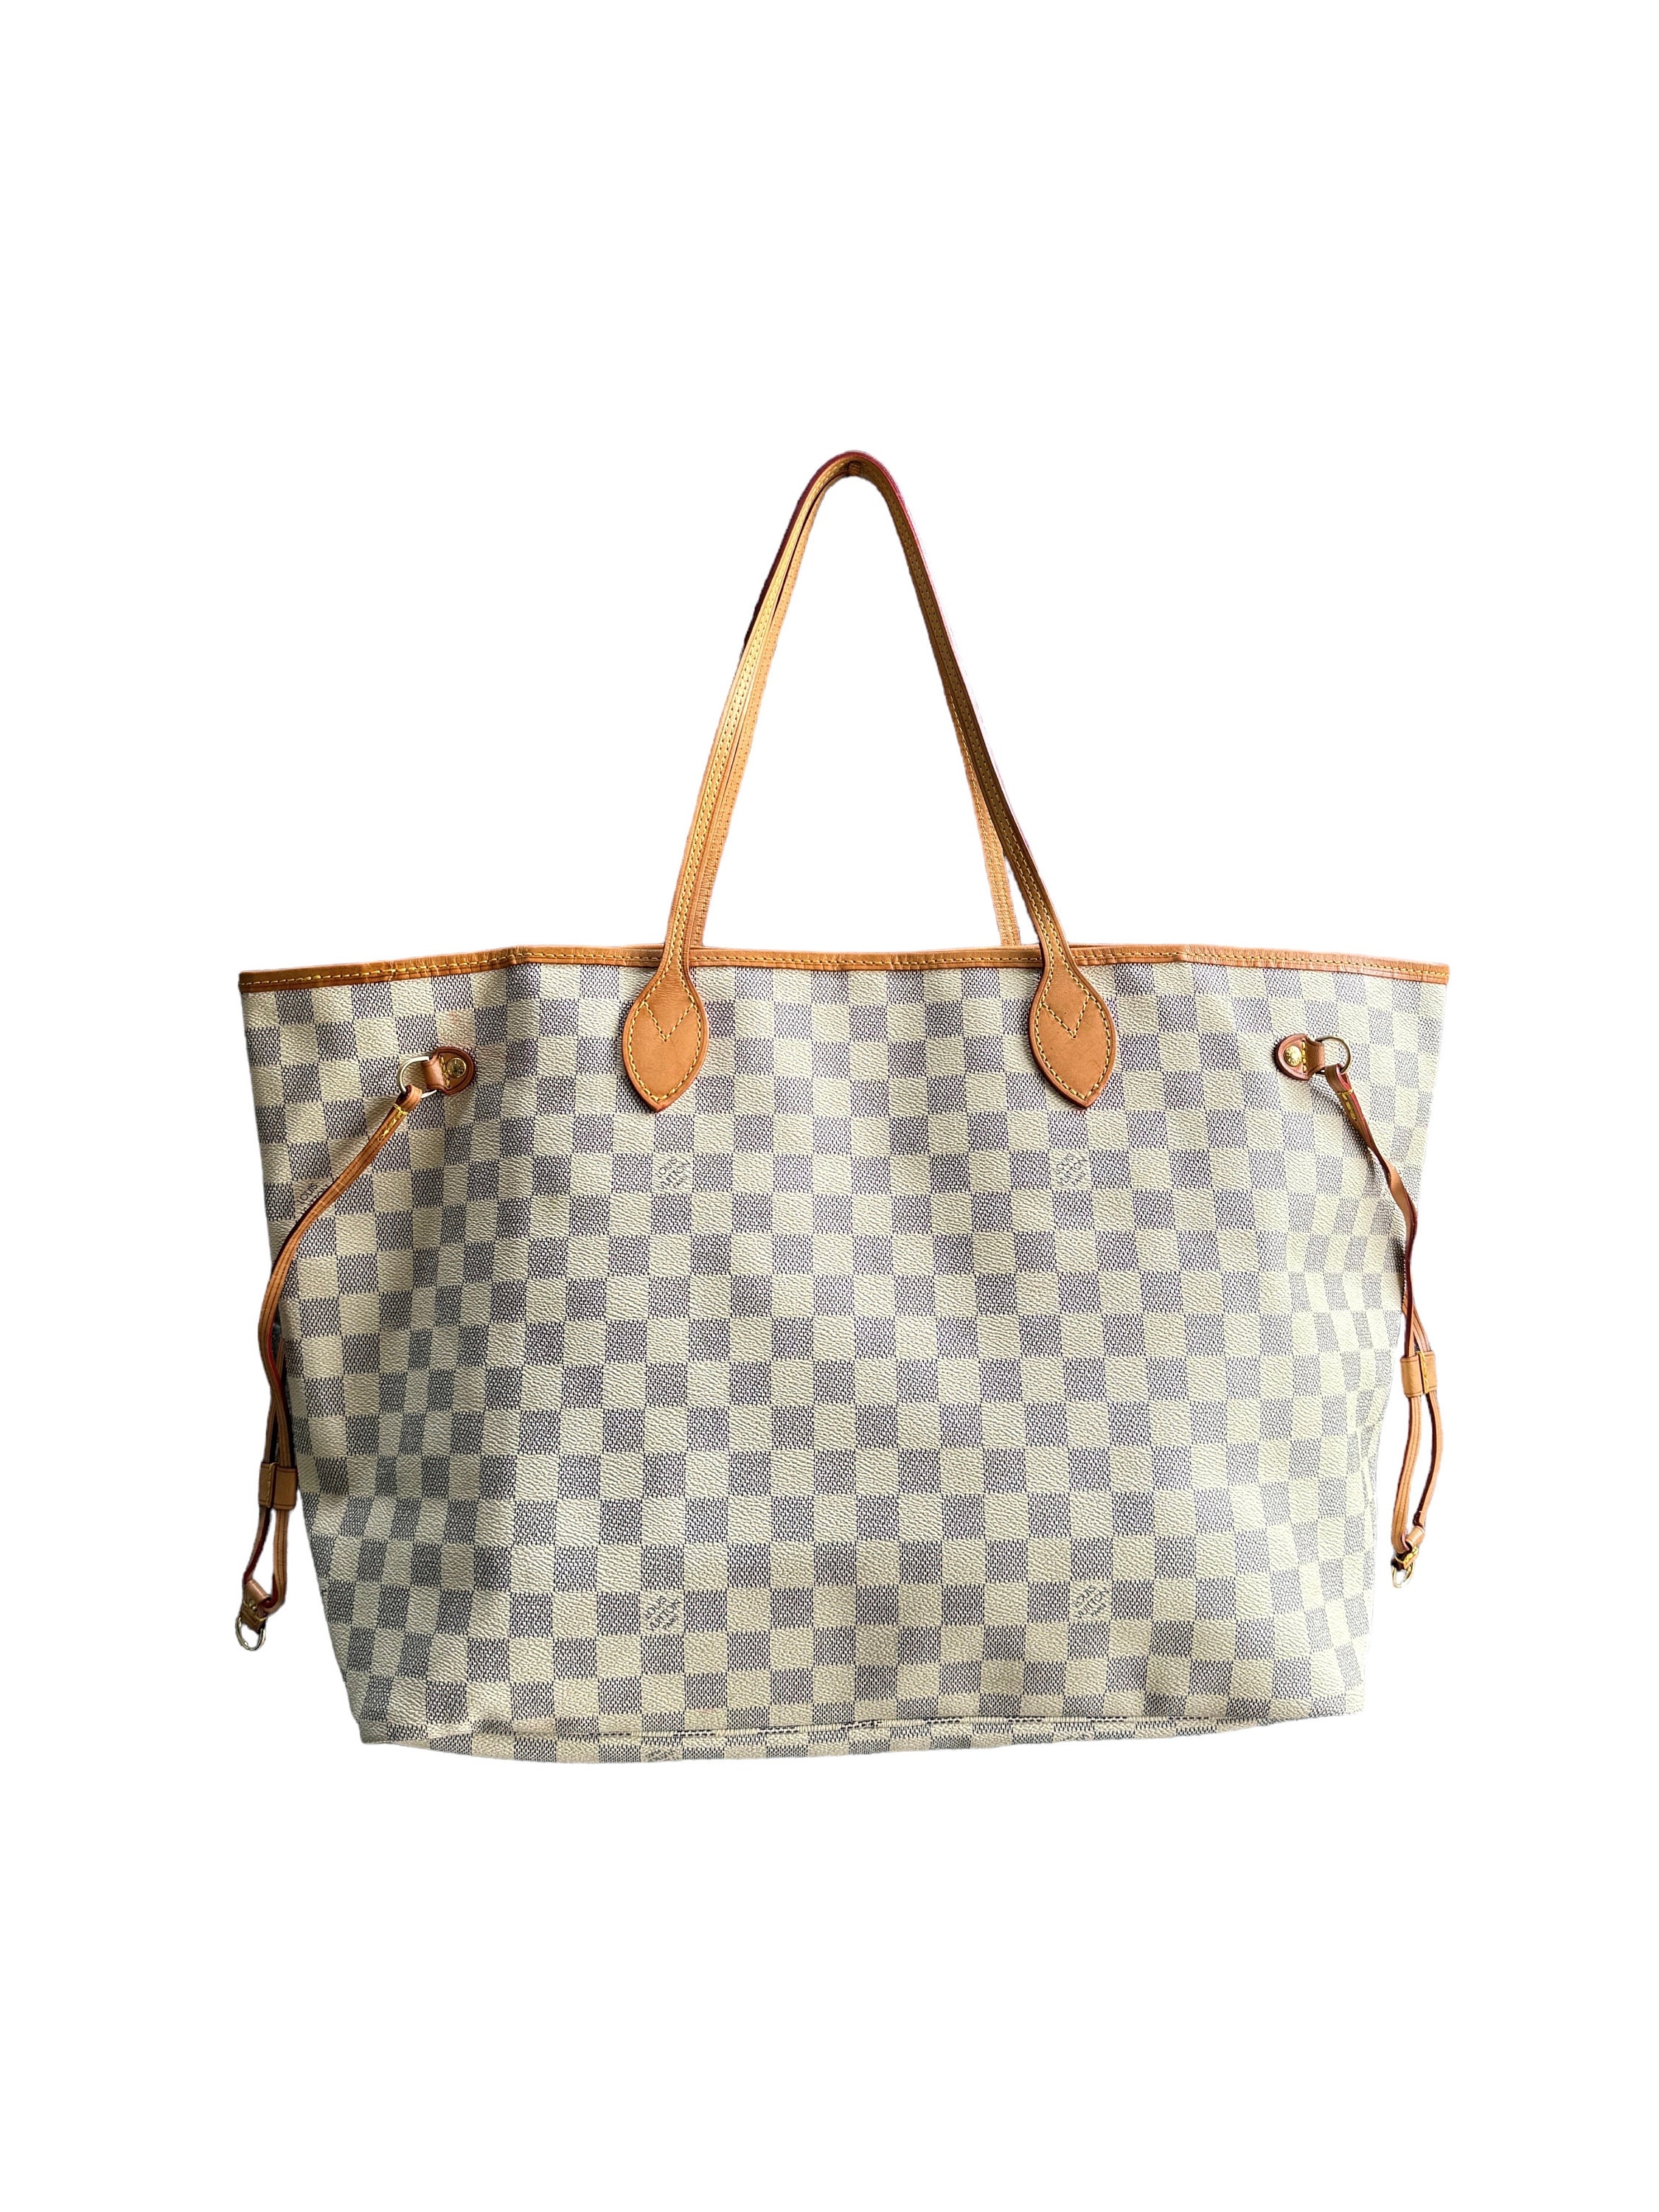 Louis Vuitton Damier Ebene Customized Hand Painted Butterfly